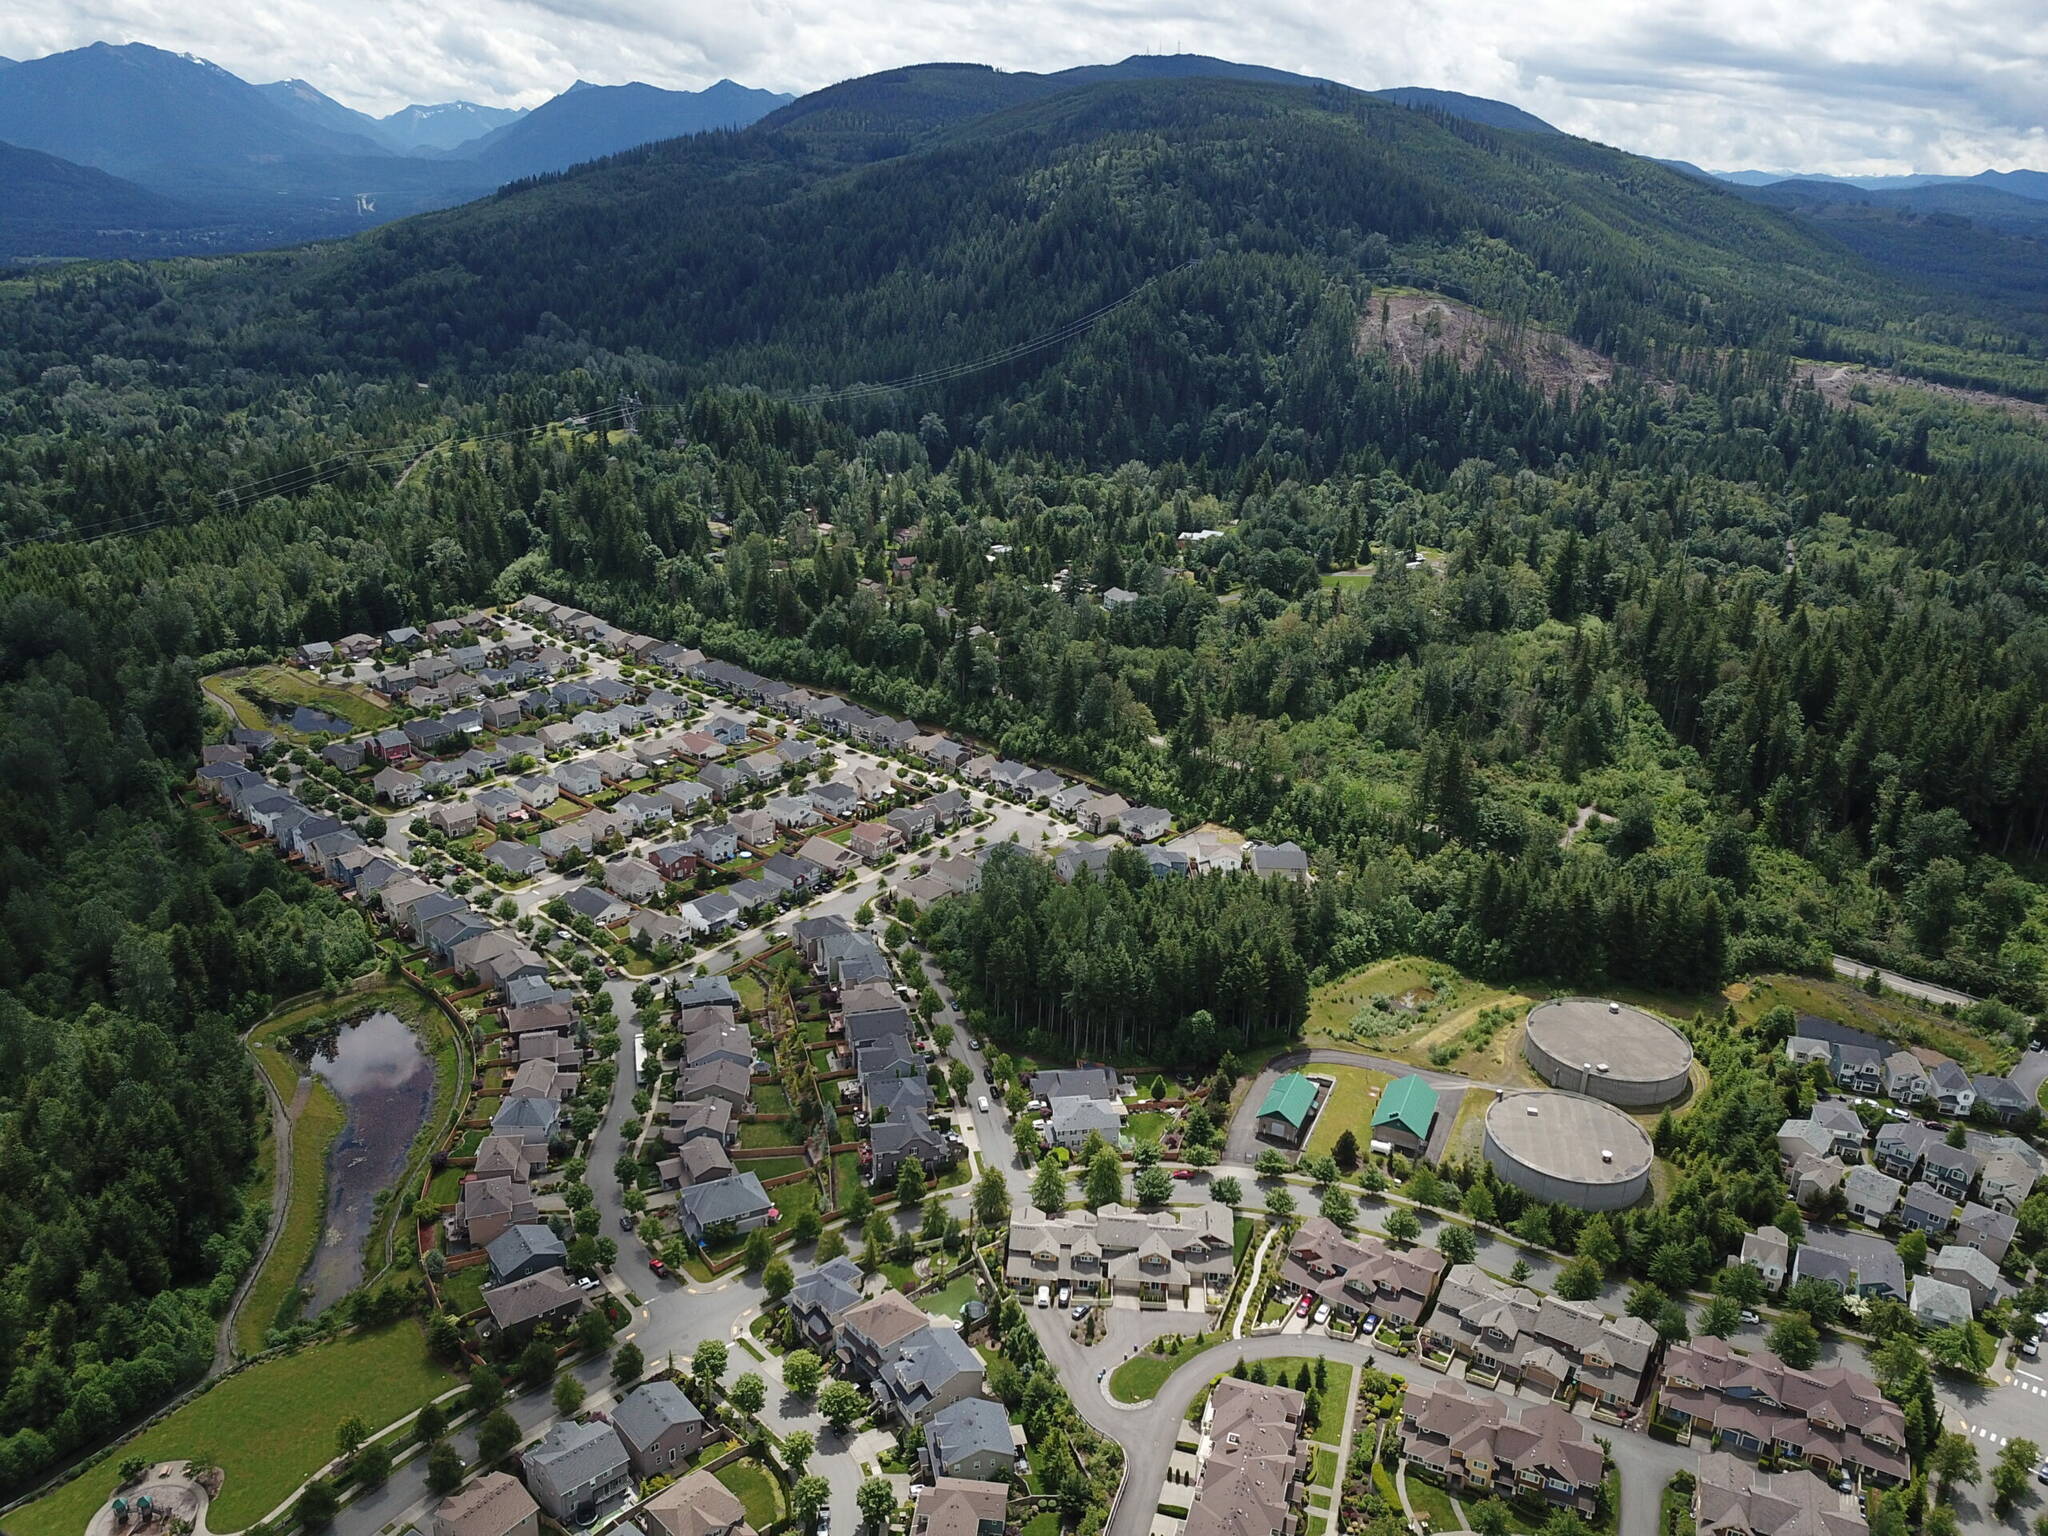 Aerial view of Snoqualmie. Photo courtesy of the City of Snoqualmie